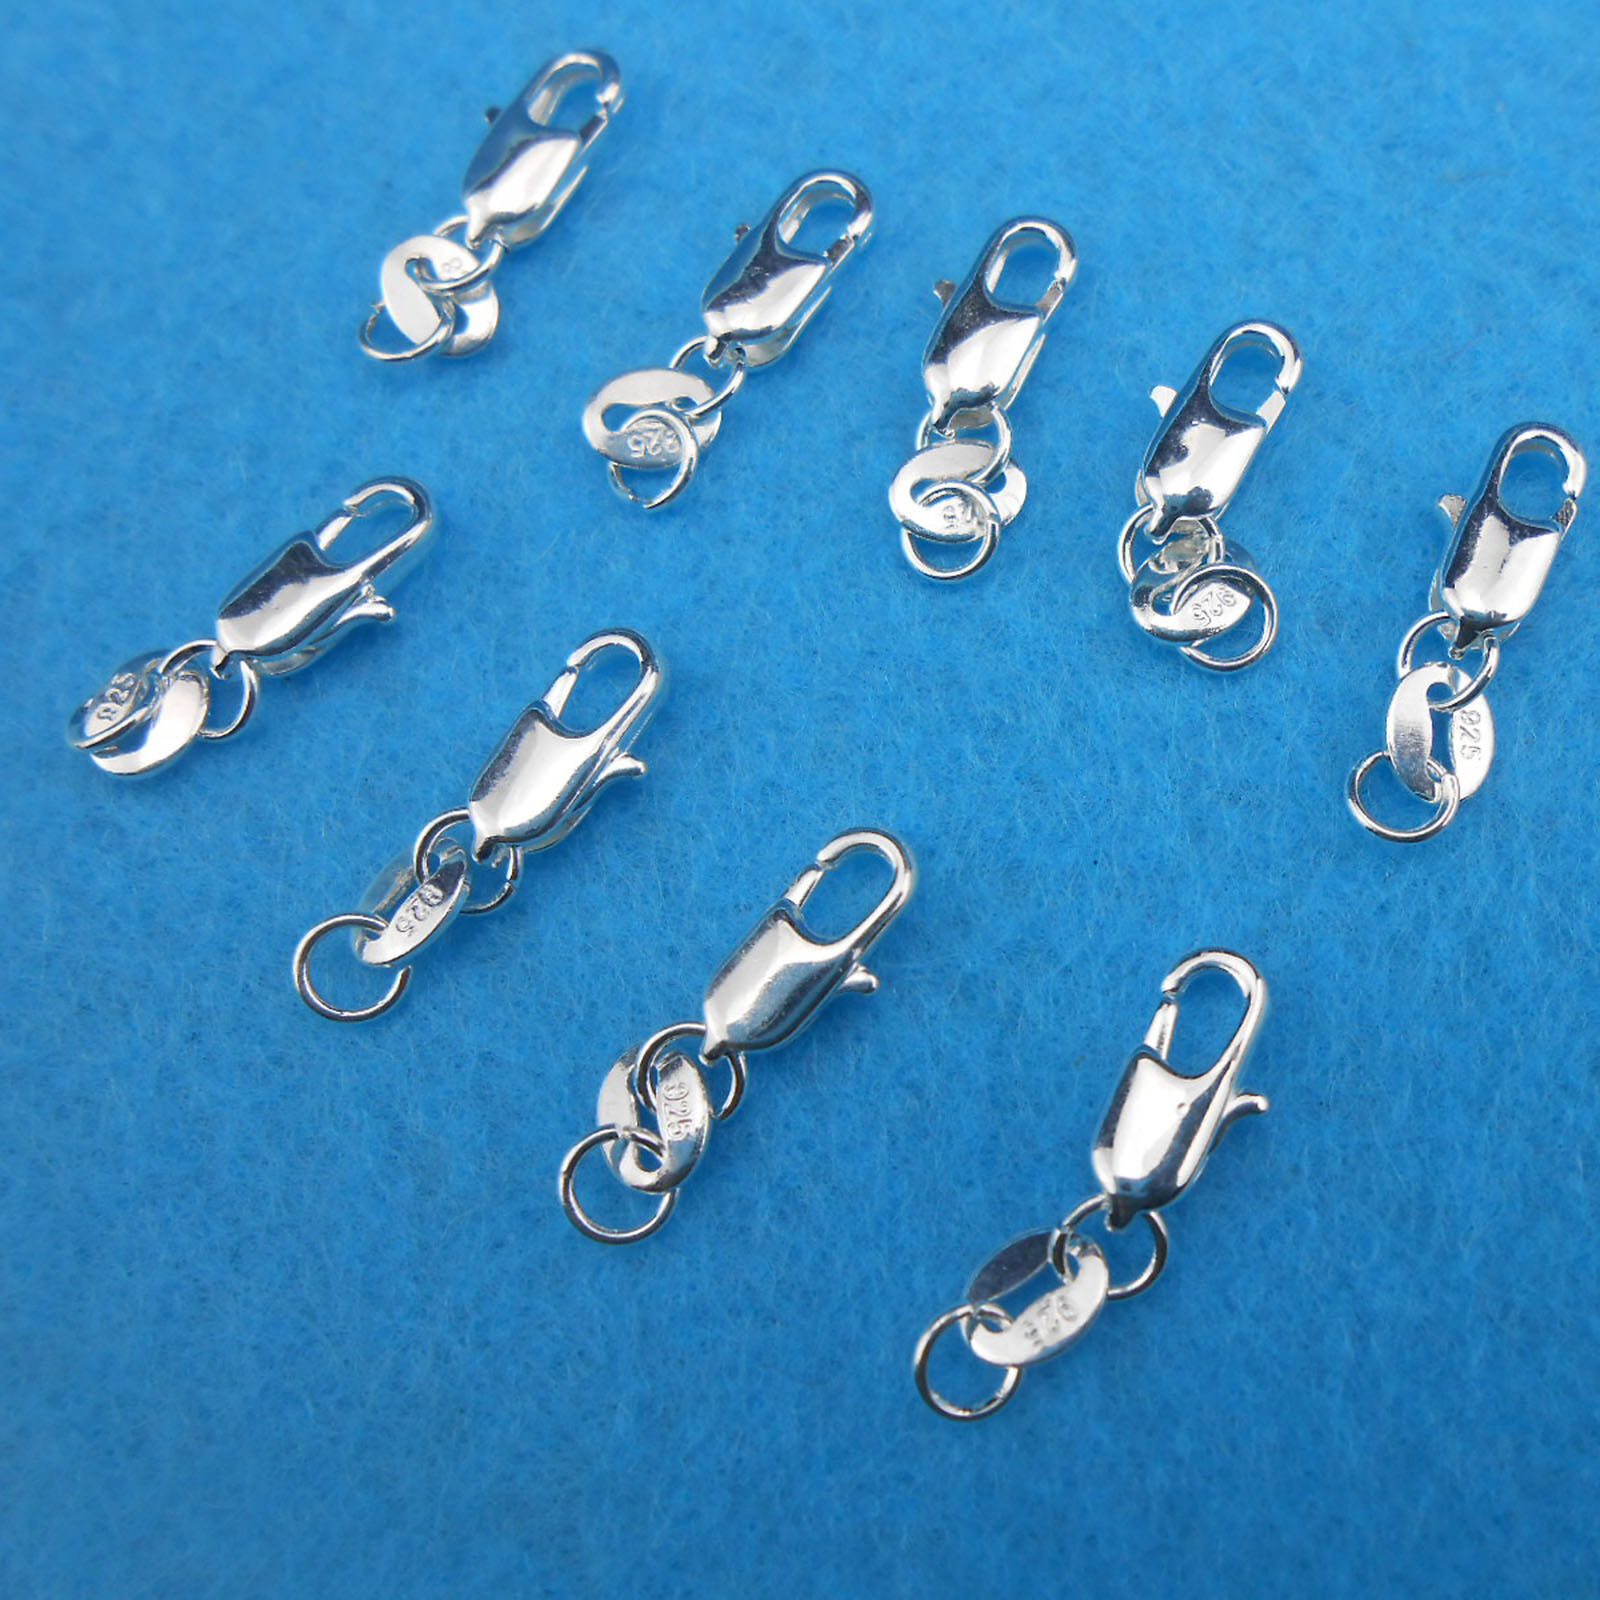 Wholesale 20-50pcs Jewelry Findings 925 Sterling Silver Lobster Clasps Hallmark